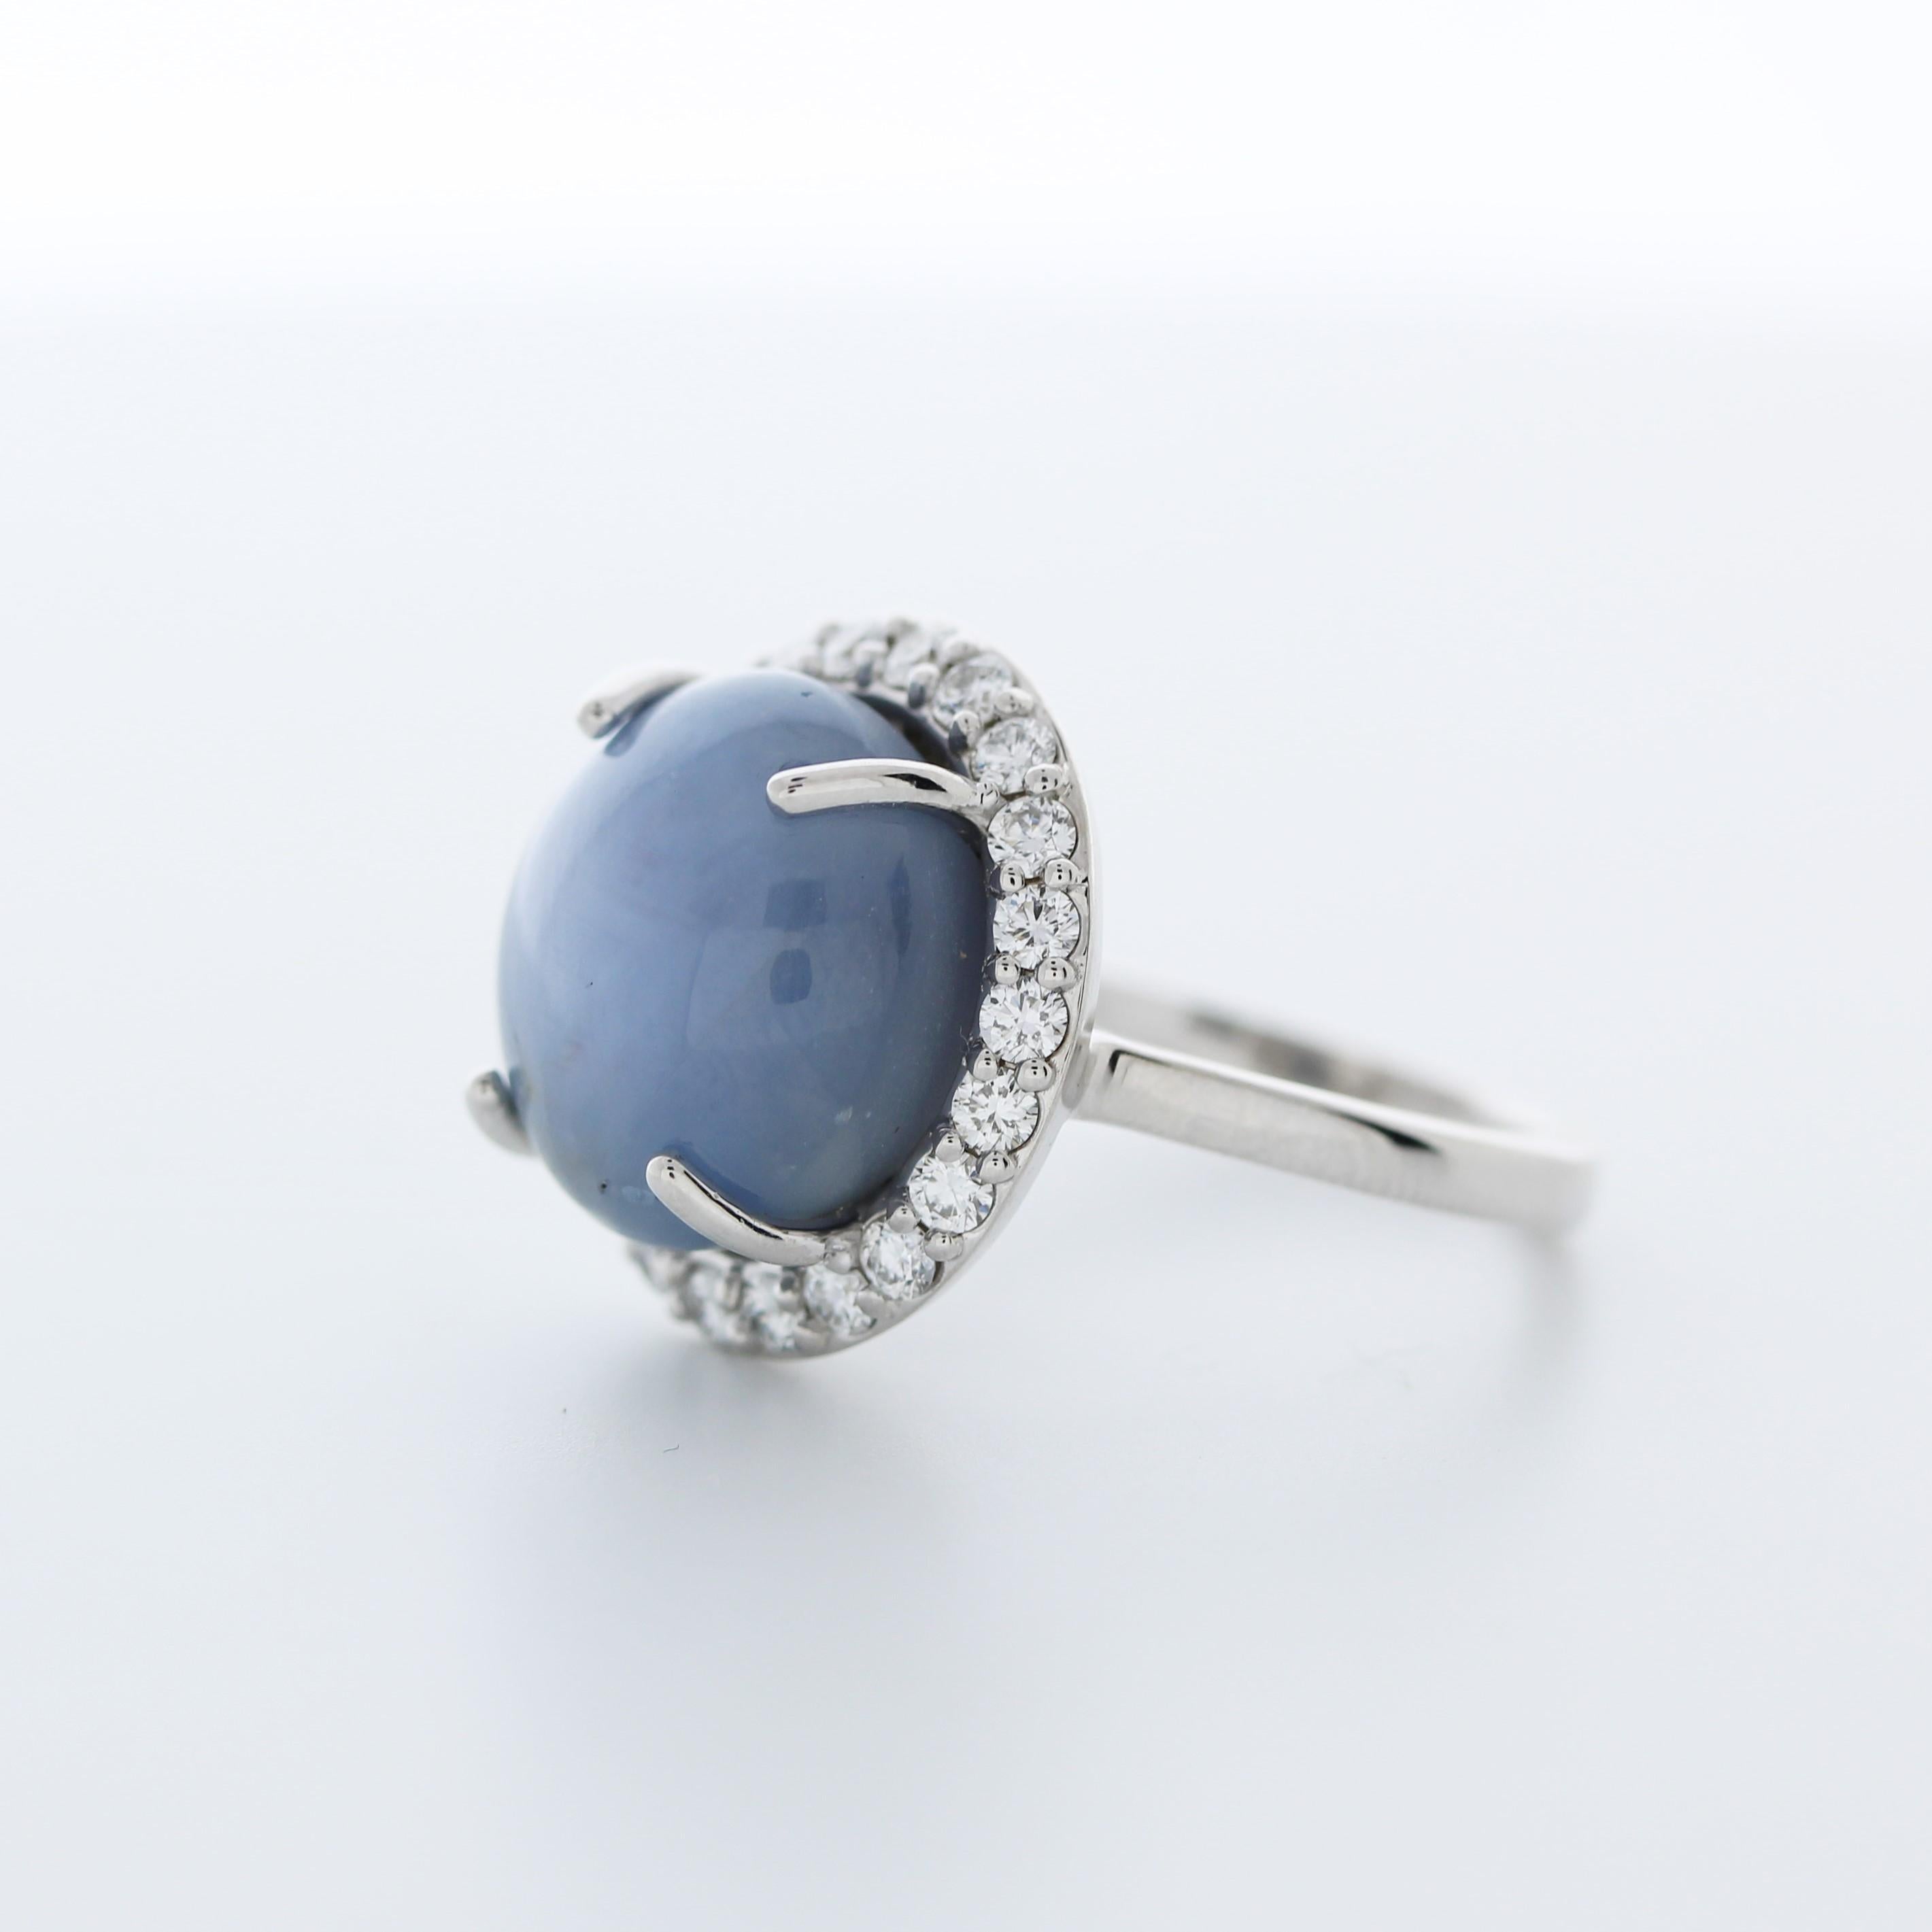 A fashion ring featuring an 18k white gold band with a main stone of an 18.21 carat cabochon-cut star sapphire and 22 round-cut diamonds totaling 0.73 carats as side stones would be a stunning and eye-catching choice.